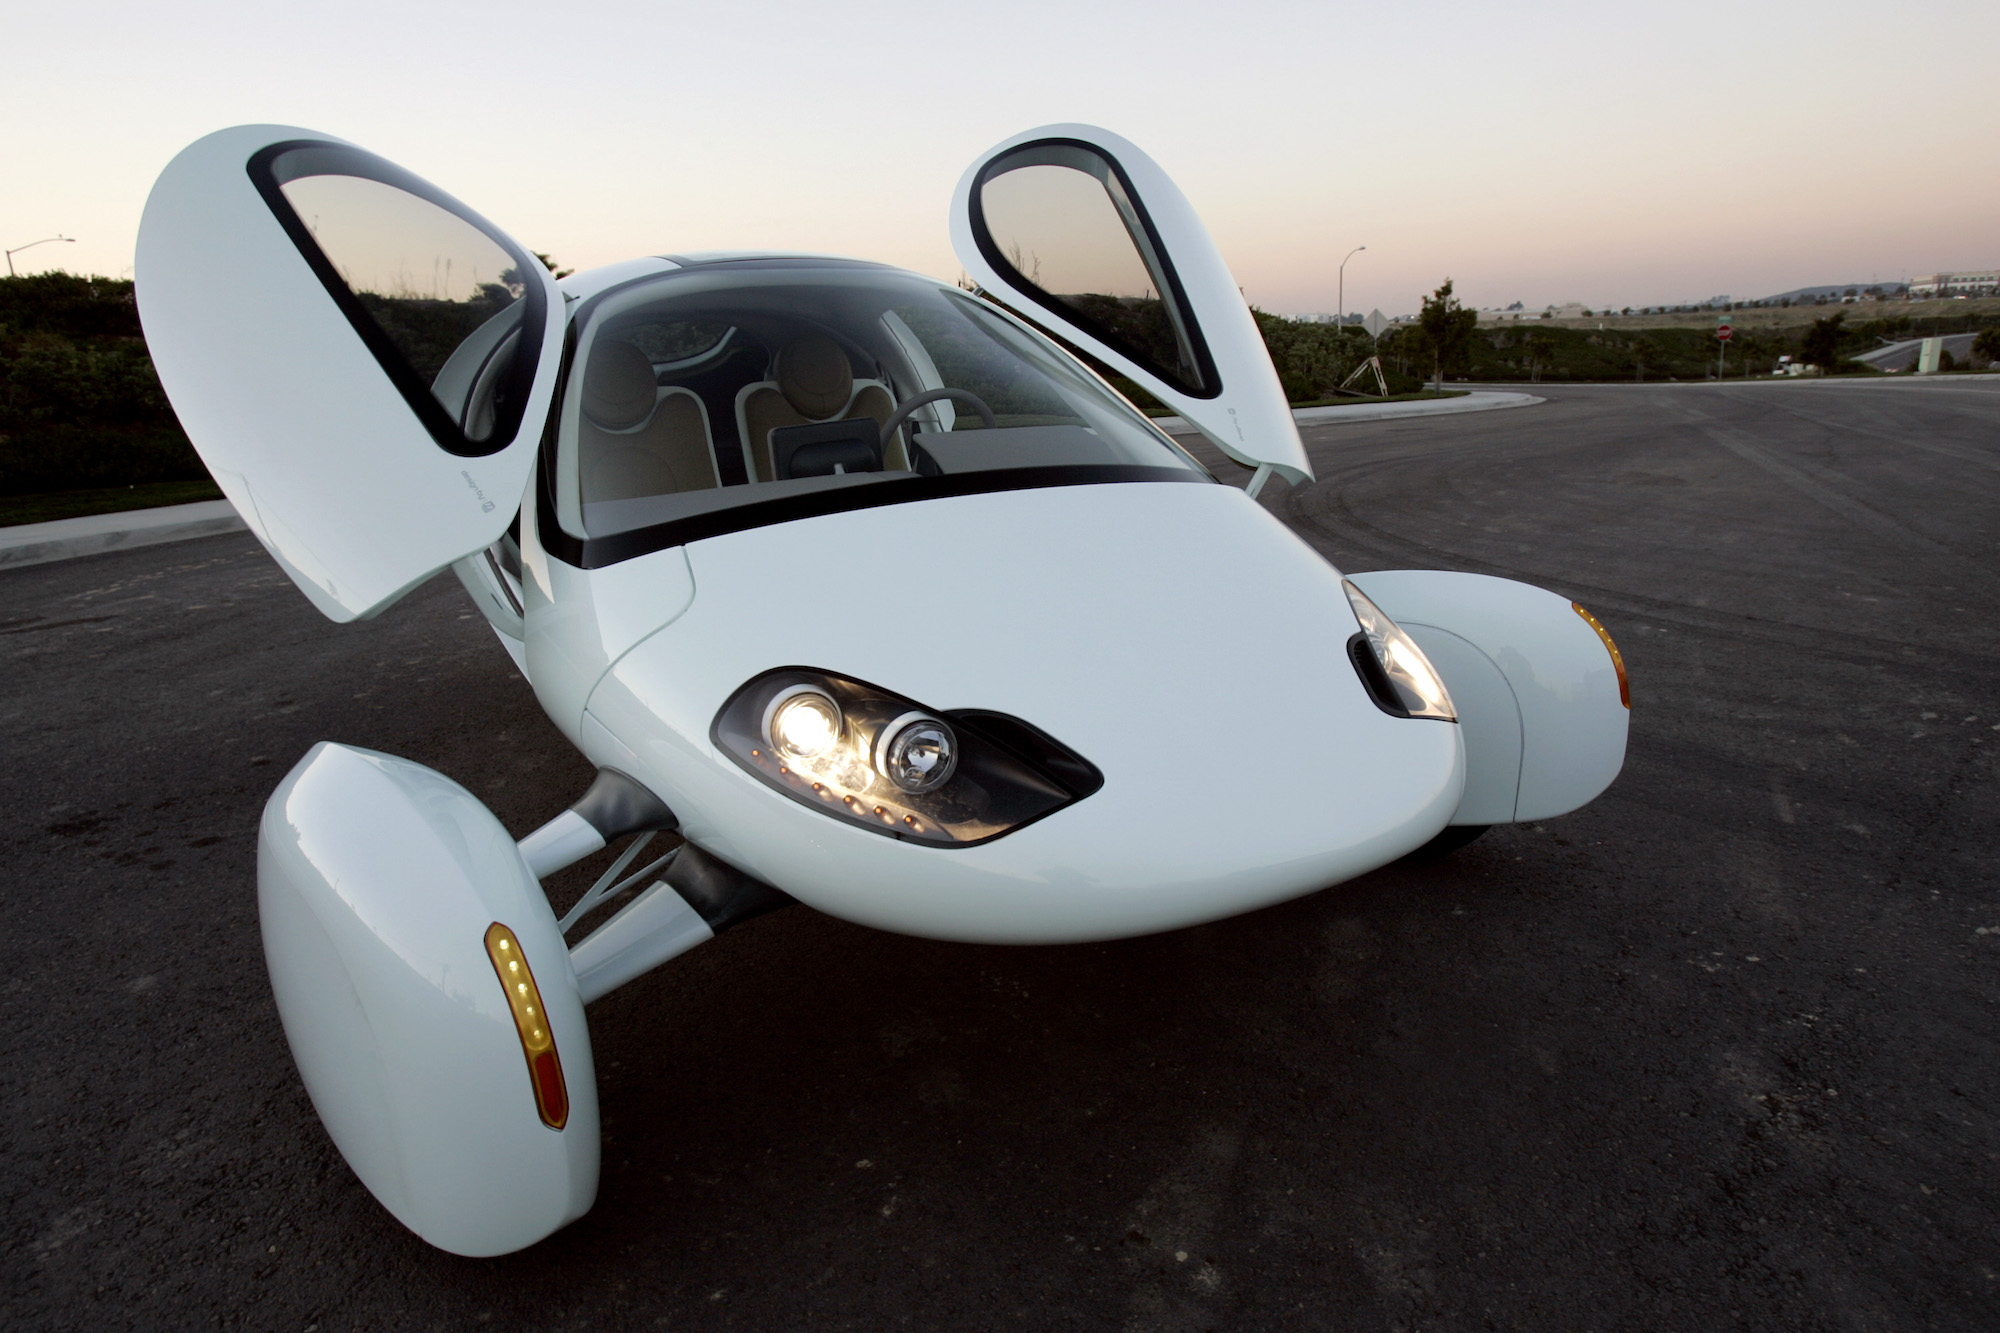 The 2008 Aptera Typ-1 was designed as an electric vehicle and later as an extended-range electric.